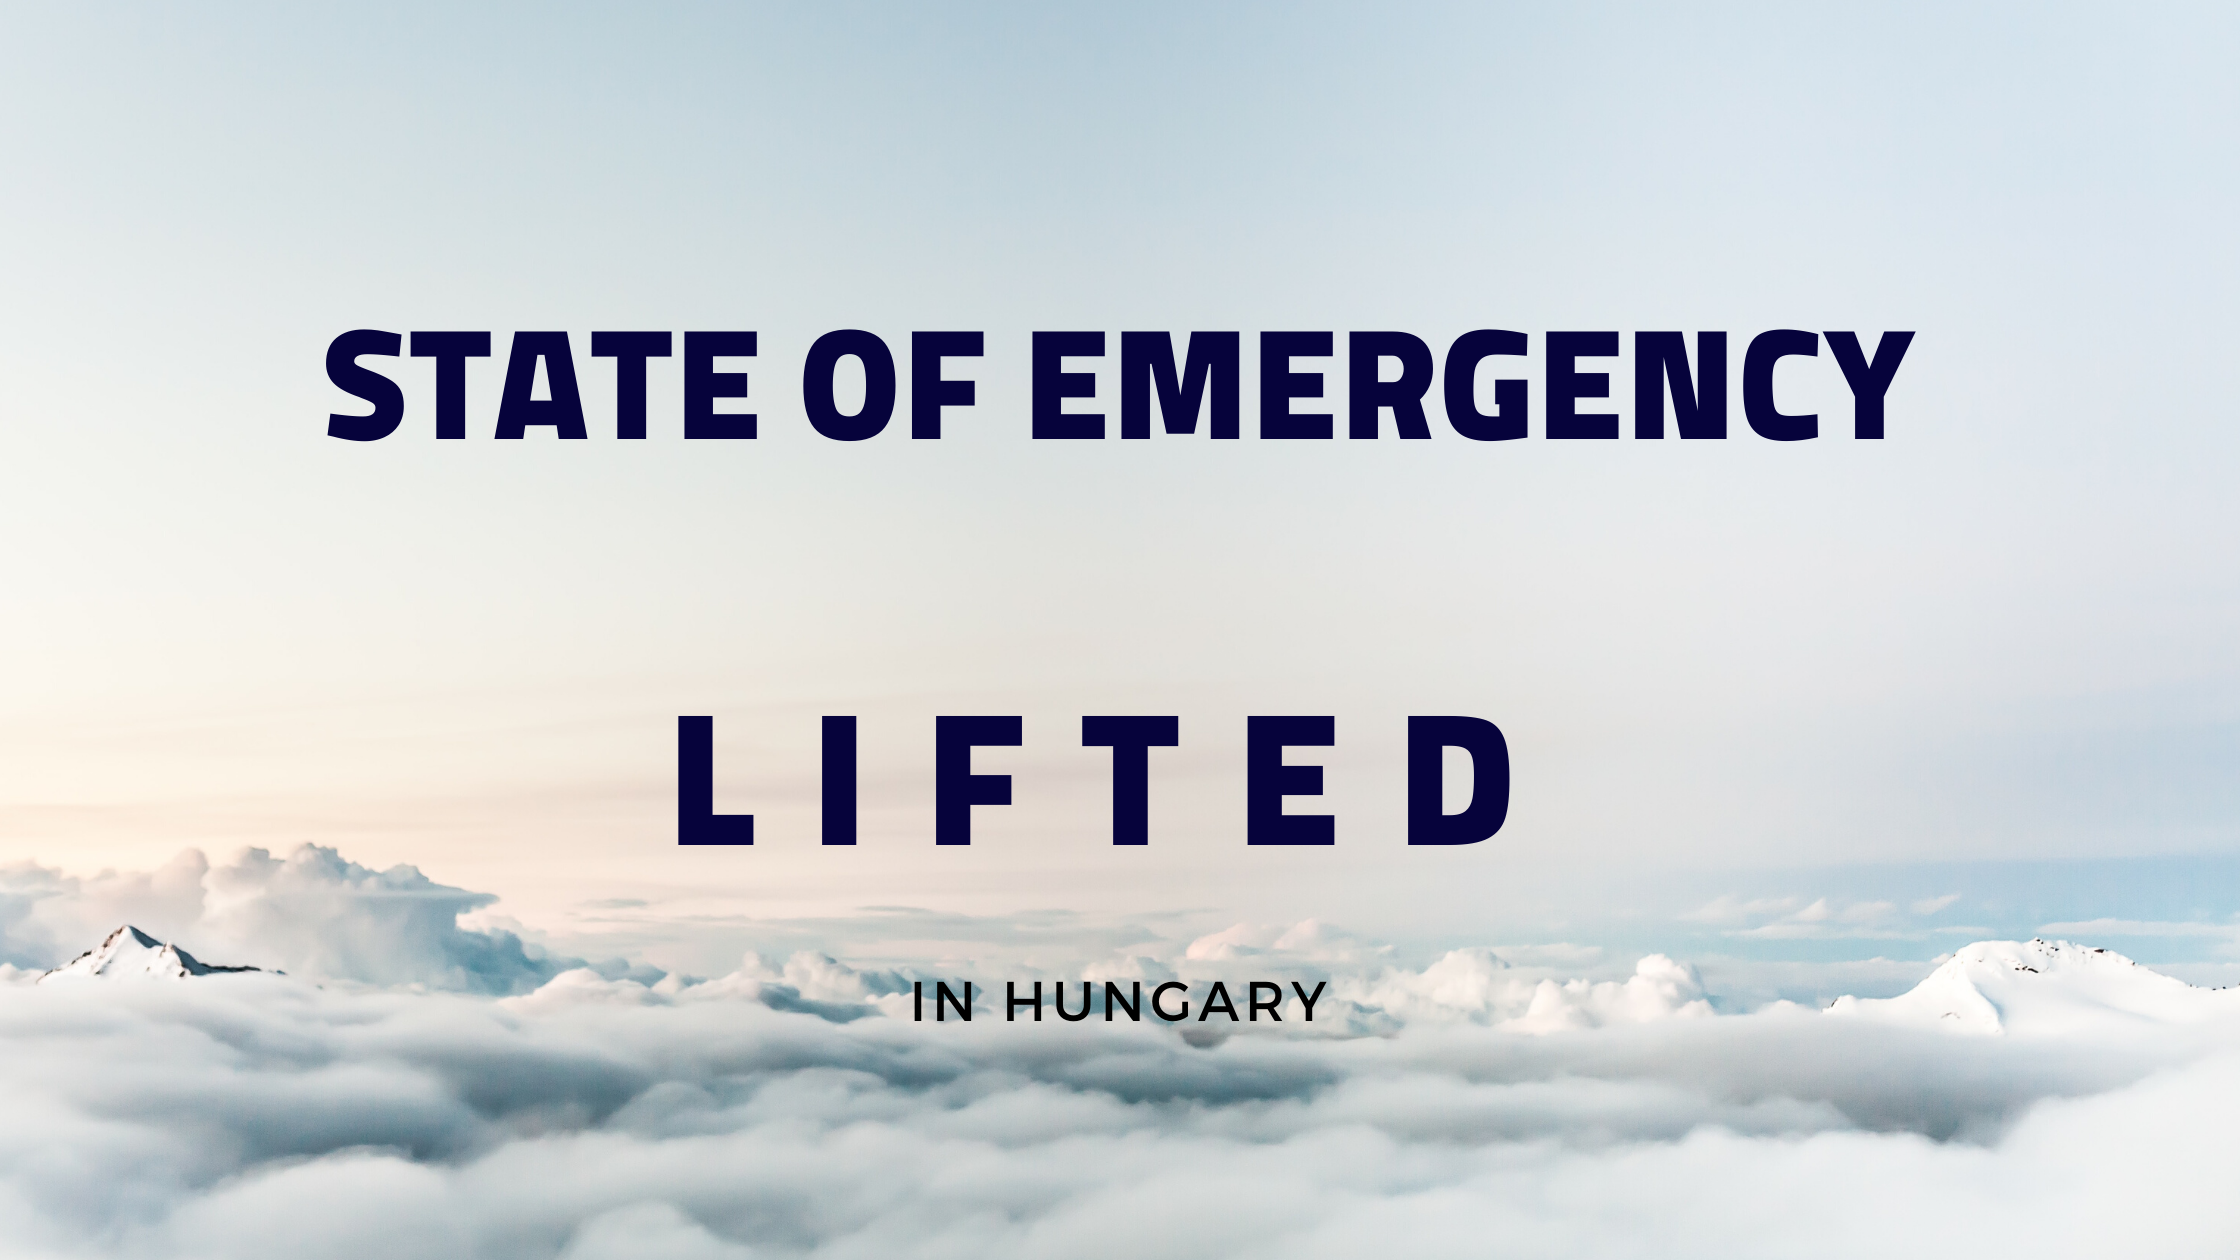 State of emergency lifted in Hungary